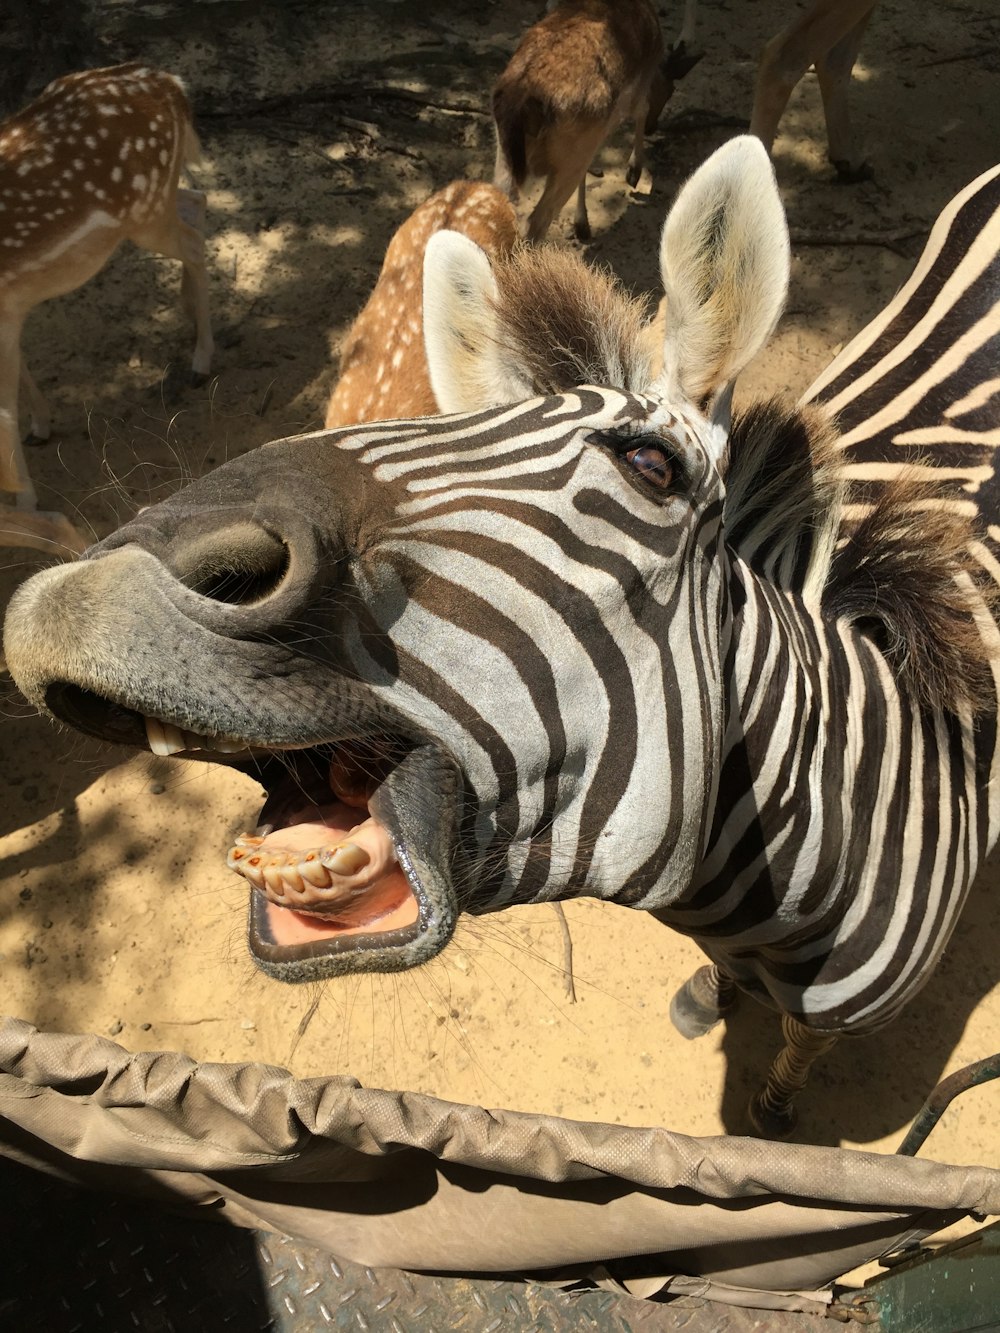 A zebra opening his mouth to yawn.